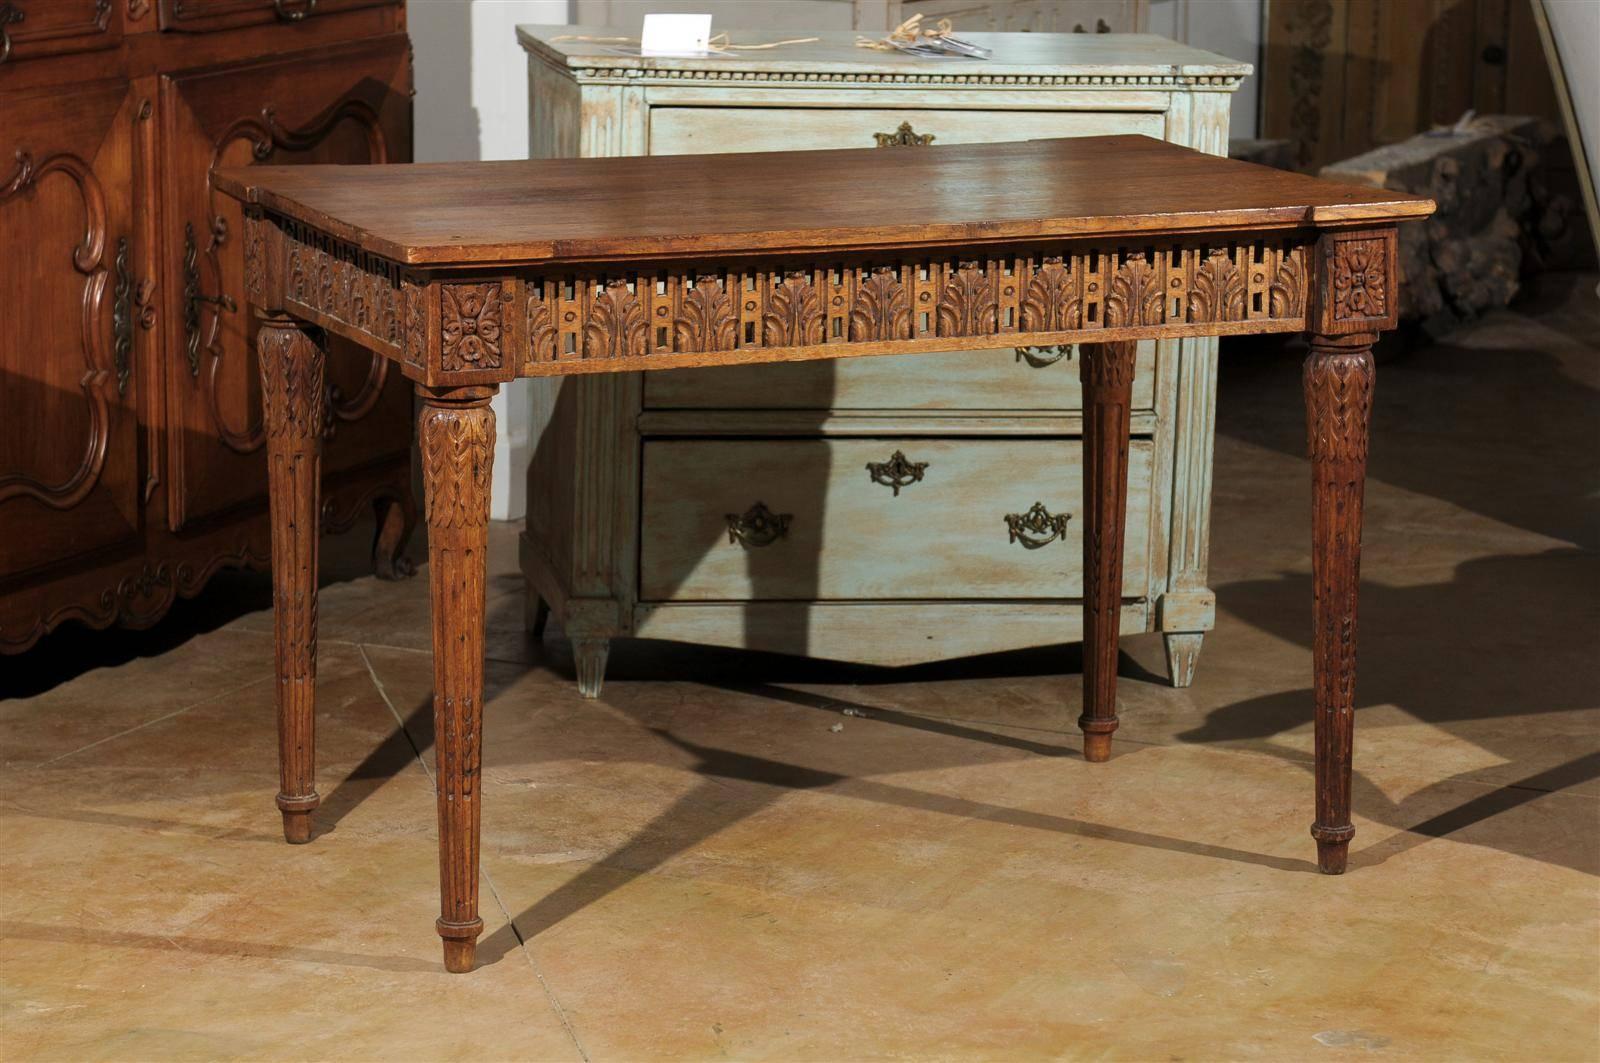 A French period Directoire carved oak side table with pierced apron on all sides from the early 19th century. This exquisite French table features a rectangular top with protruding corners, sitting above a striking apron, richly carved with palmette